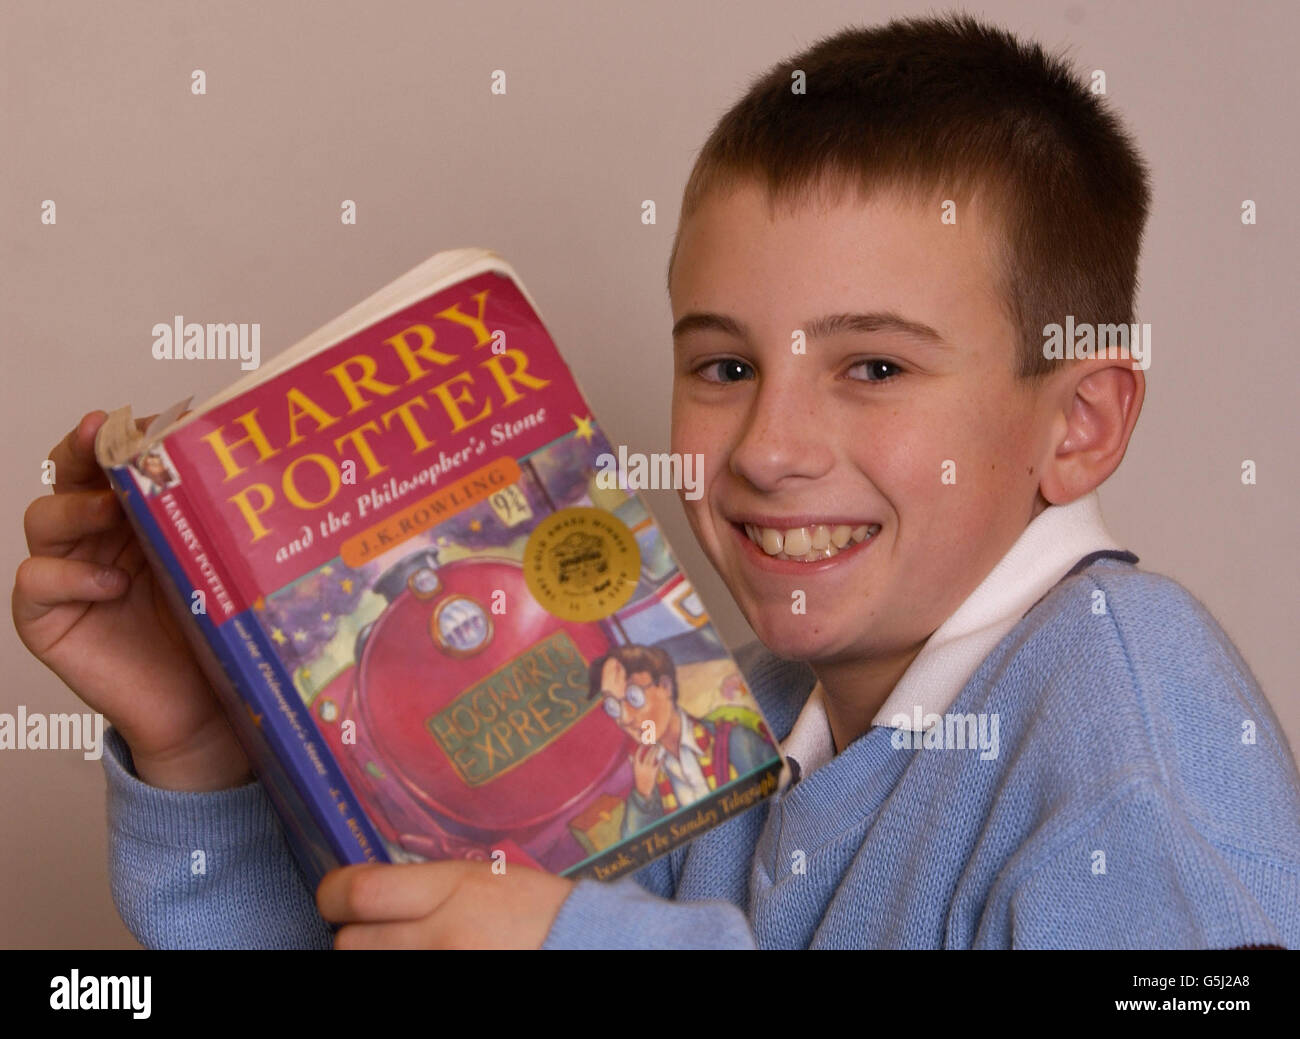 12 year old Matthew Donlan who reviewed the film 'Harry Potter and The Philosopher's Stone' for PA, Monday 5 November, 2001, said he thought the film was 'spell-binding' and just as he imagined it. Matthew, who has read all the Harry Potter books said he thought that the film was similar to the book by J K Rowling and gave it 10 out of 10. Stock Photo